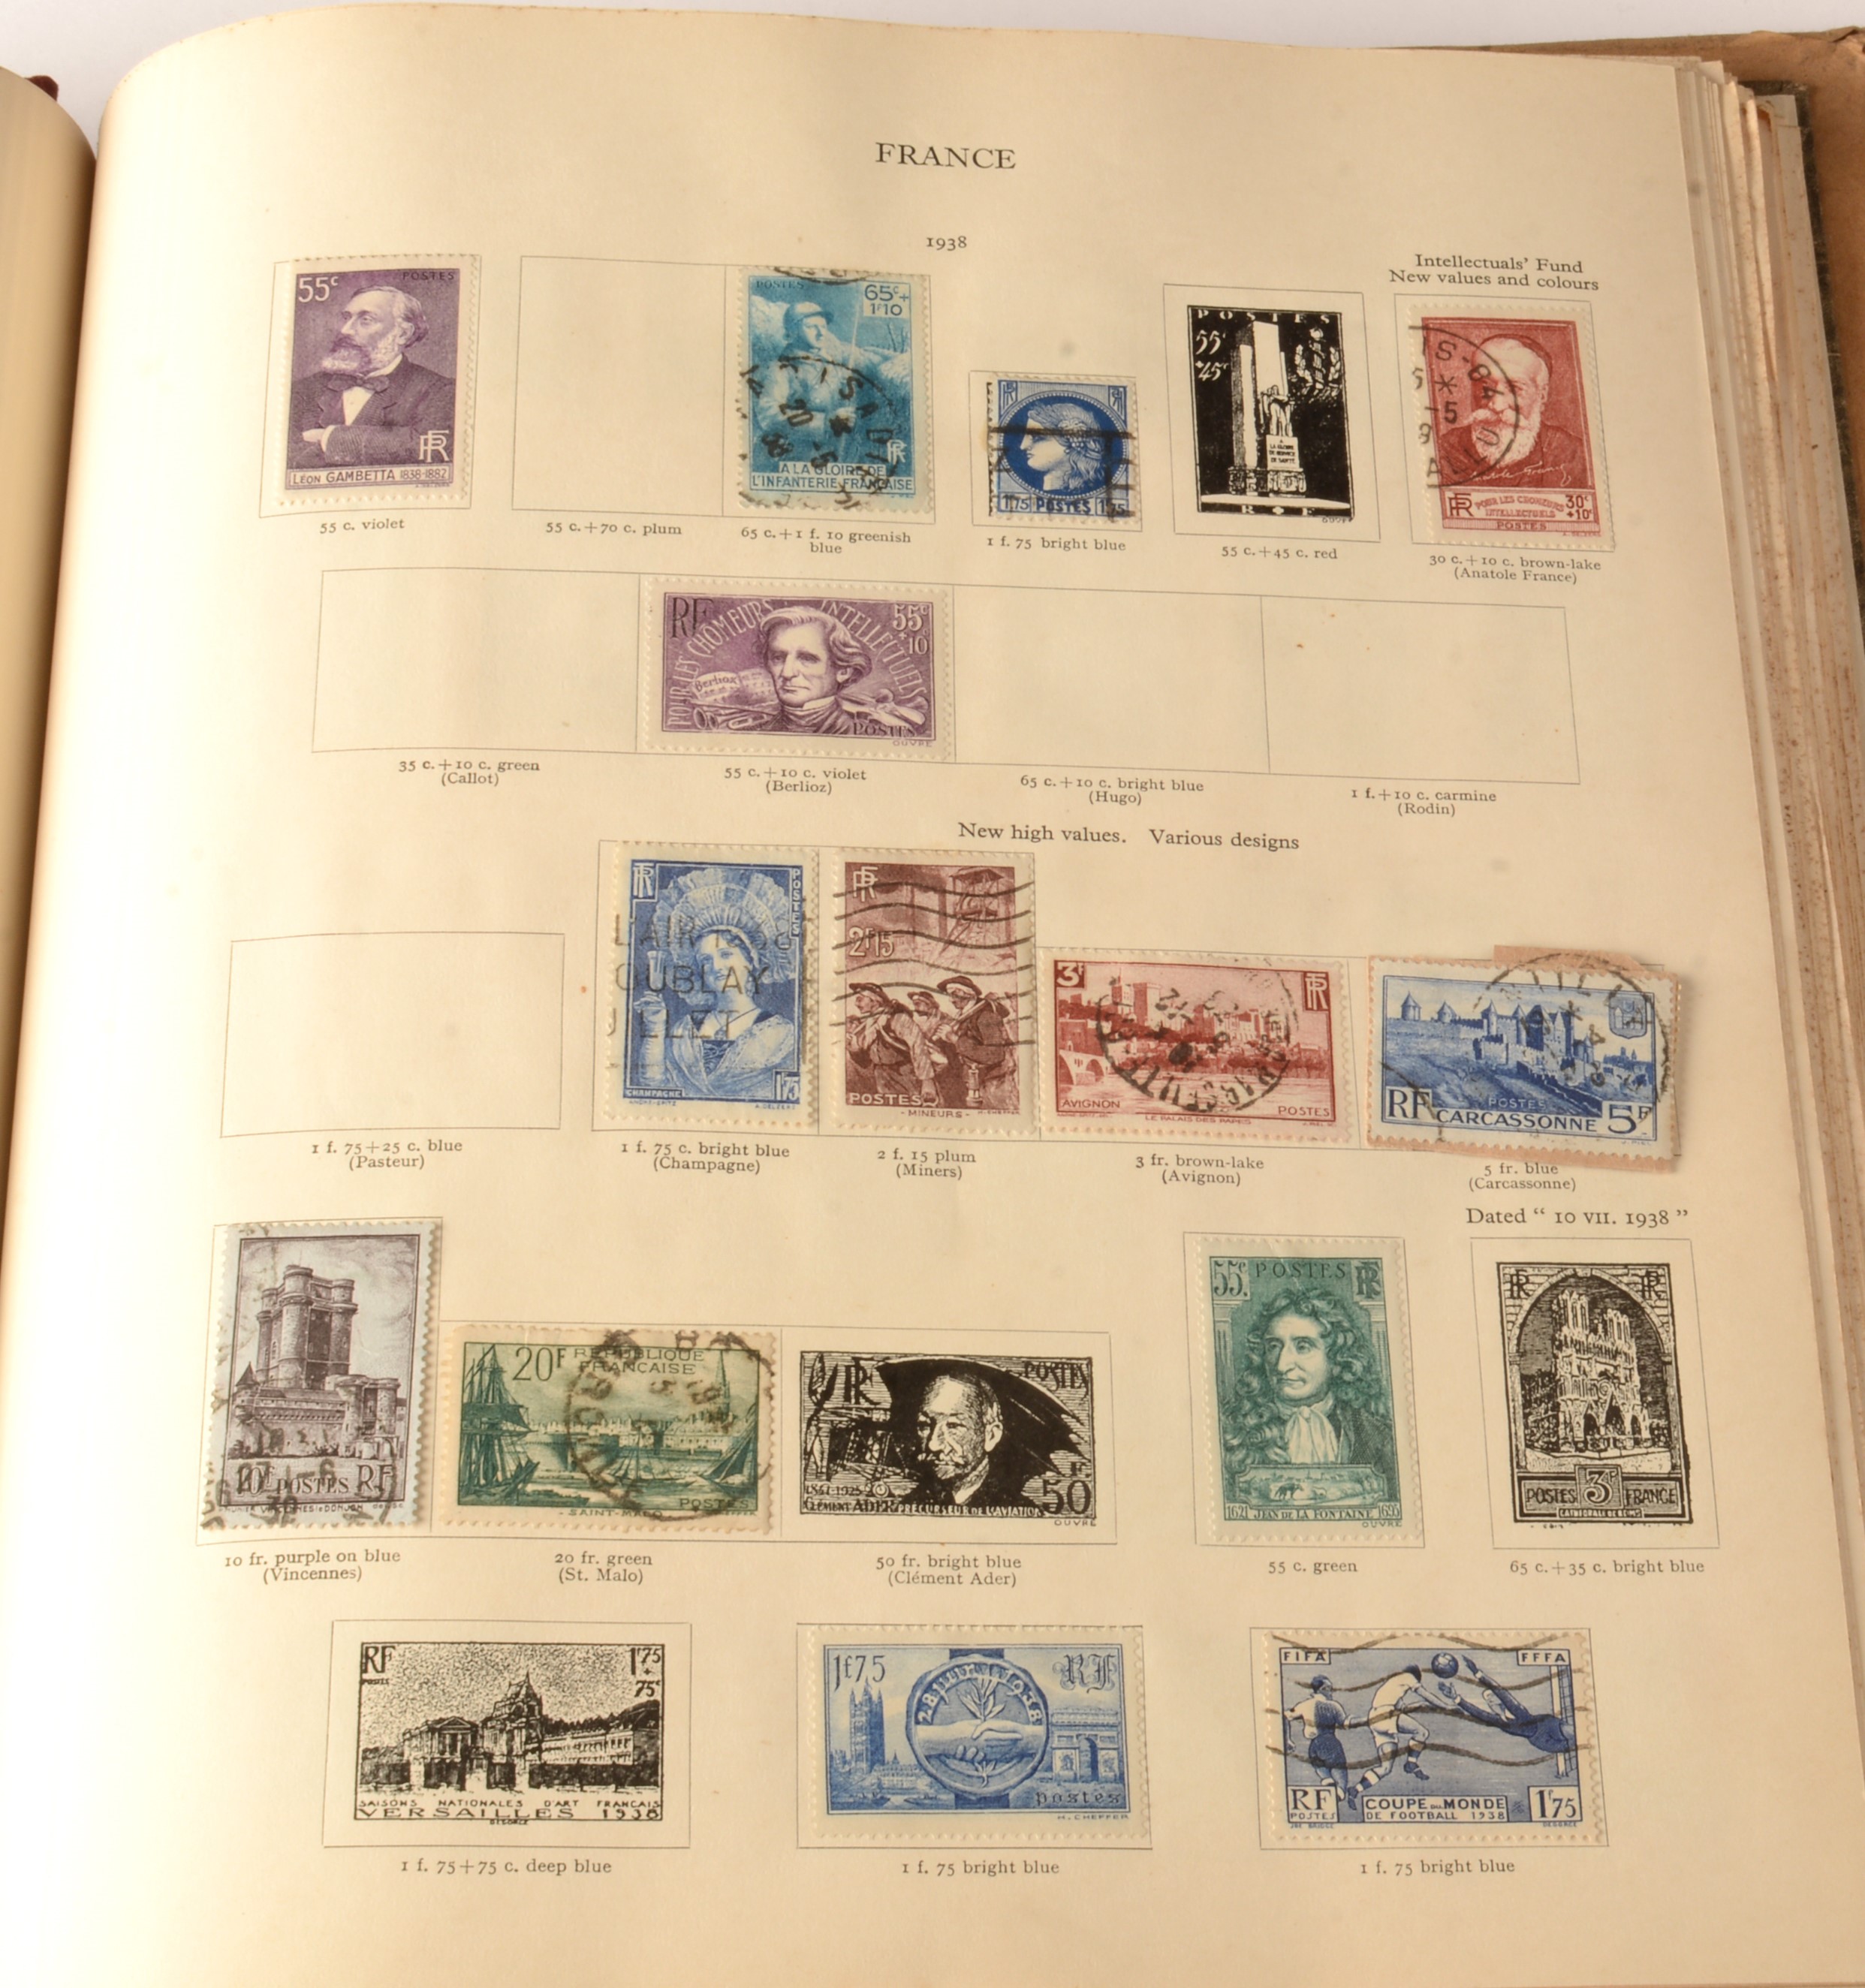 TWO STAMP ALBUMS - THE IDEAL POSTAGE STAMP ALBUM. Coins, Medals